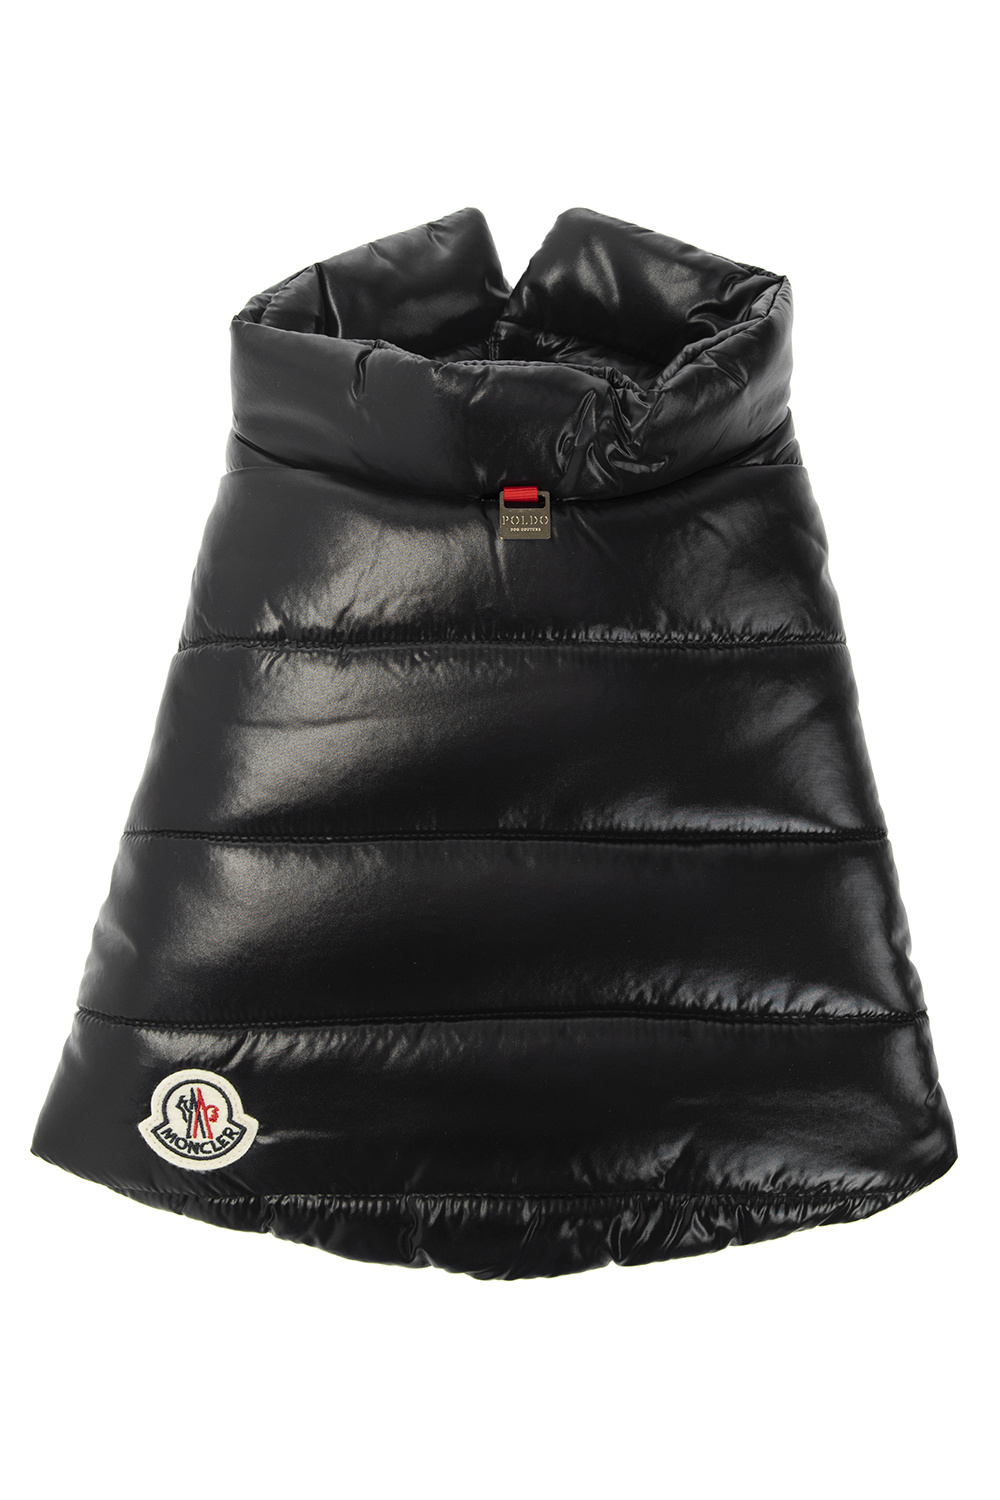 Moncler Genius Frequently asked questions